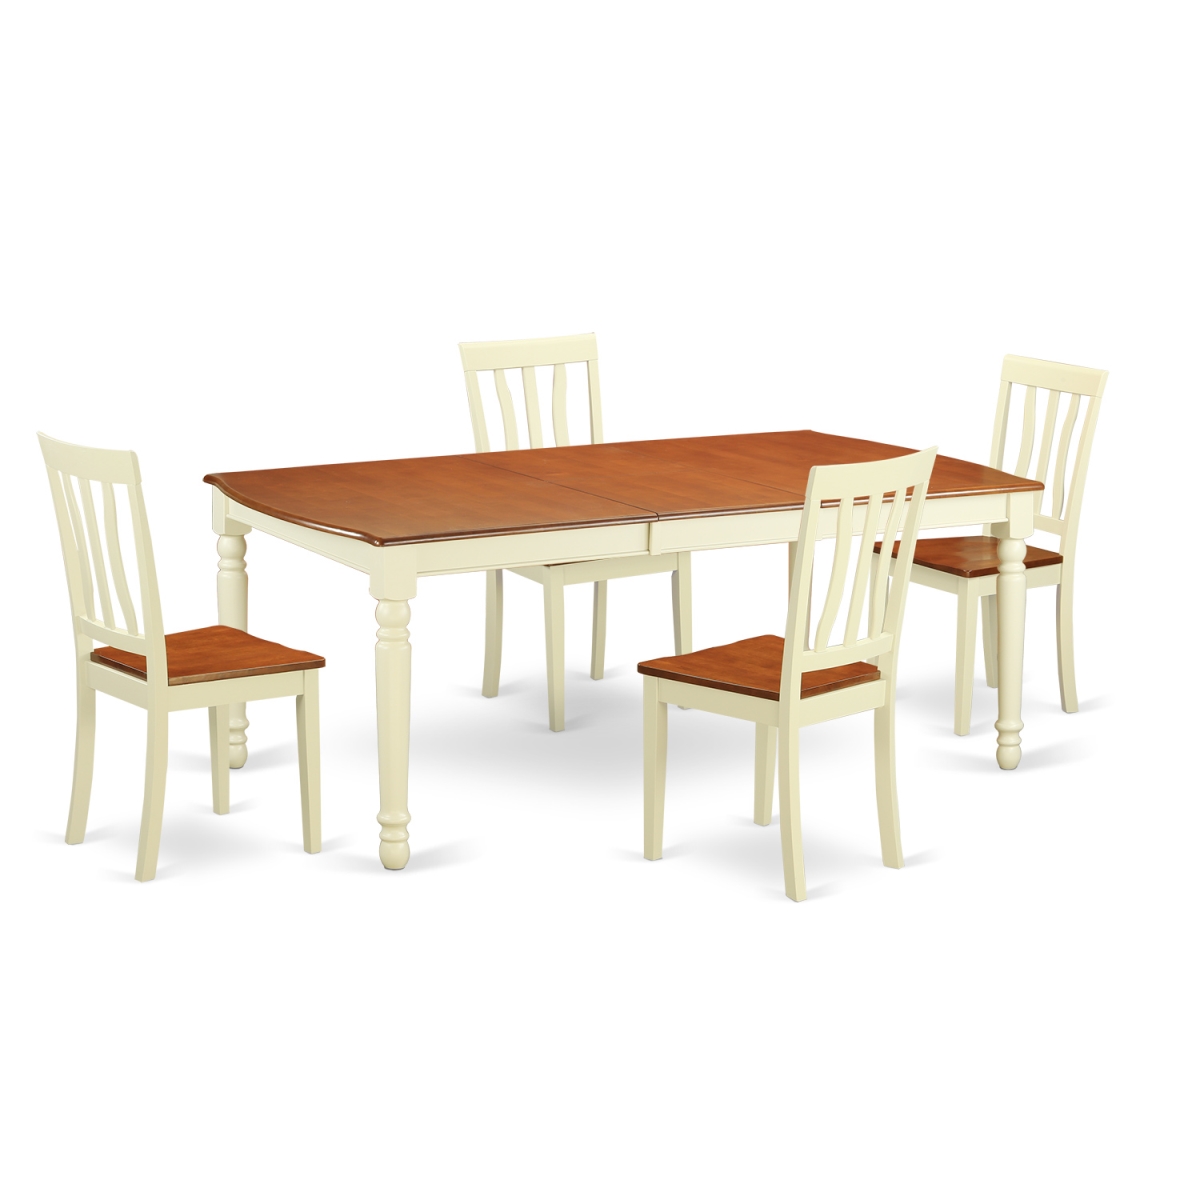 Picture of East West Furniture DOAN5-WHI-W Table & Chair Set - Dining Table & 4 Chairs, Buttermilk & Cherry - 5 Piece